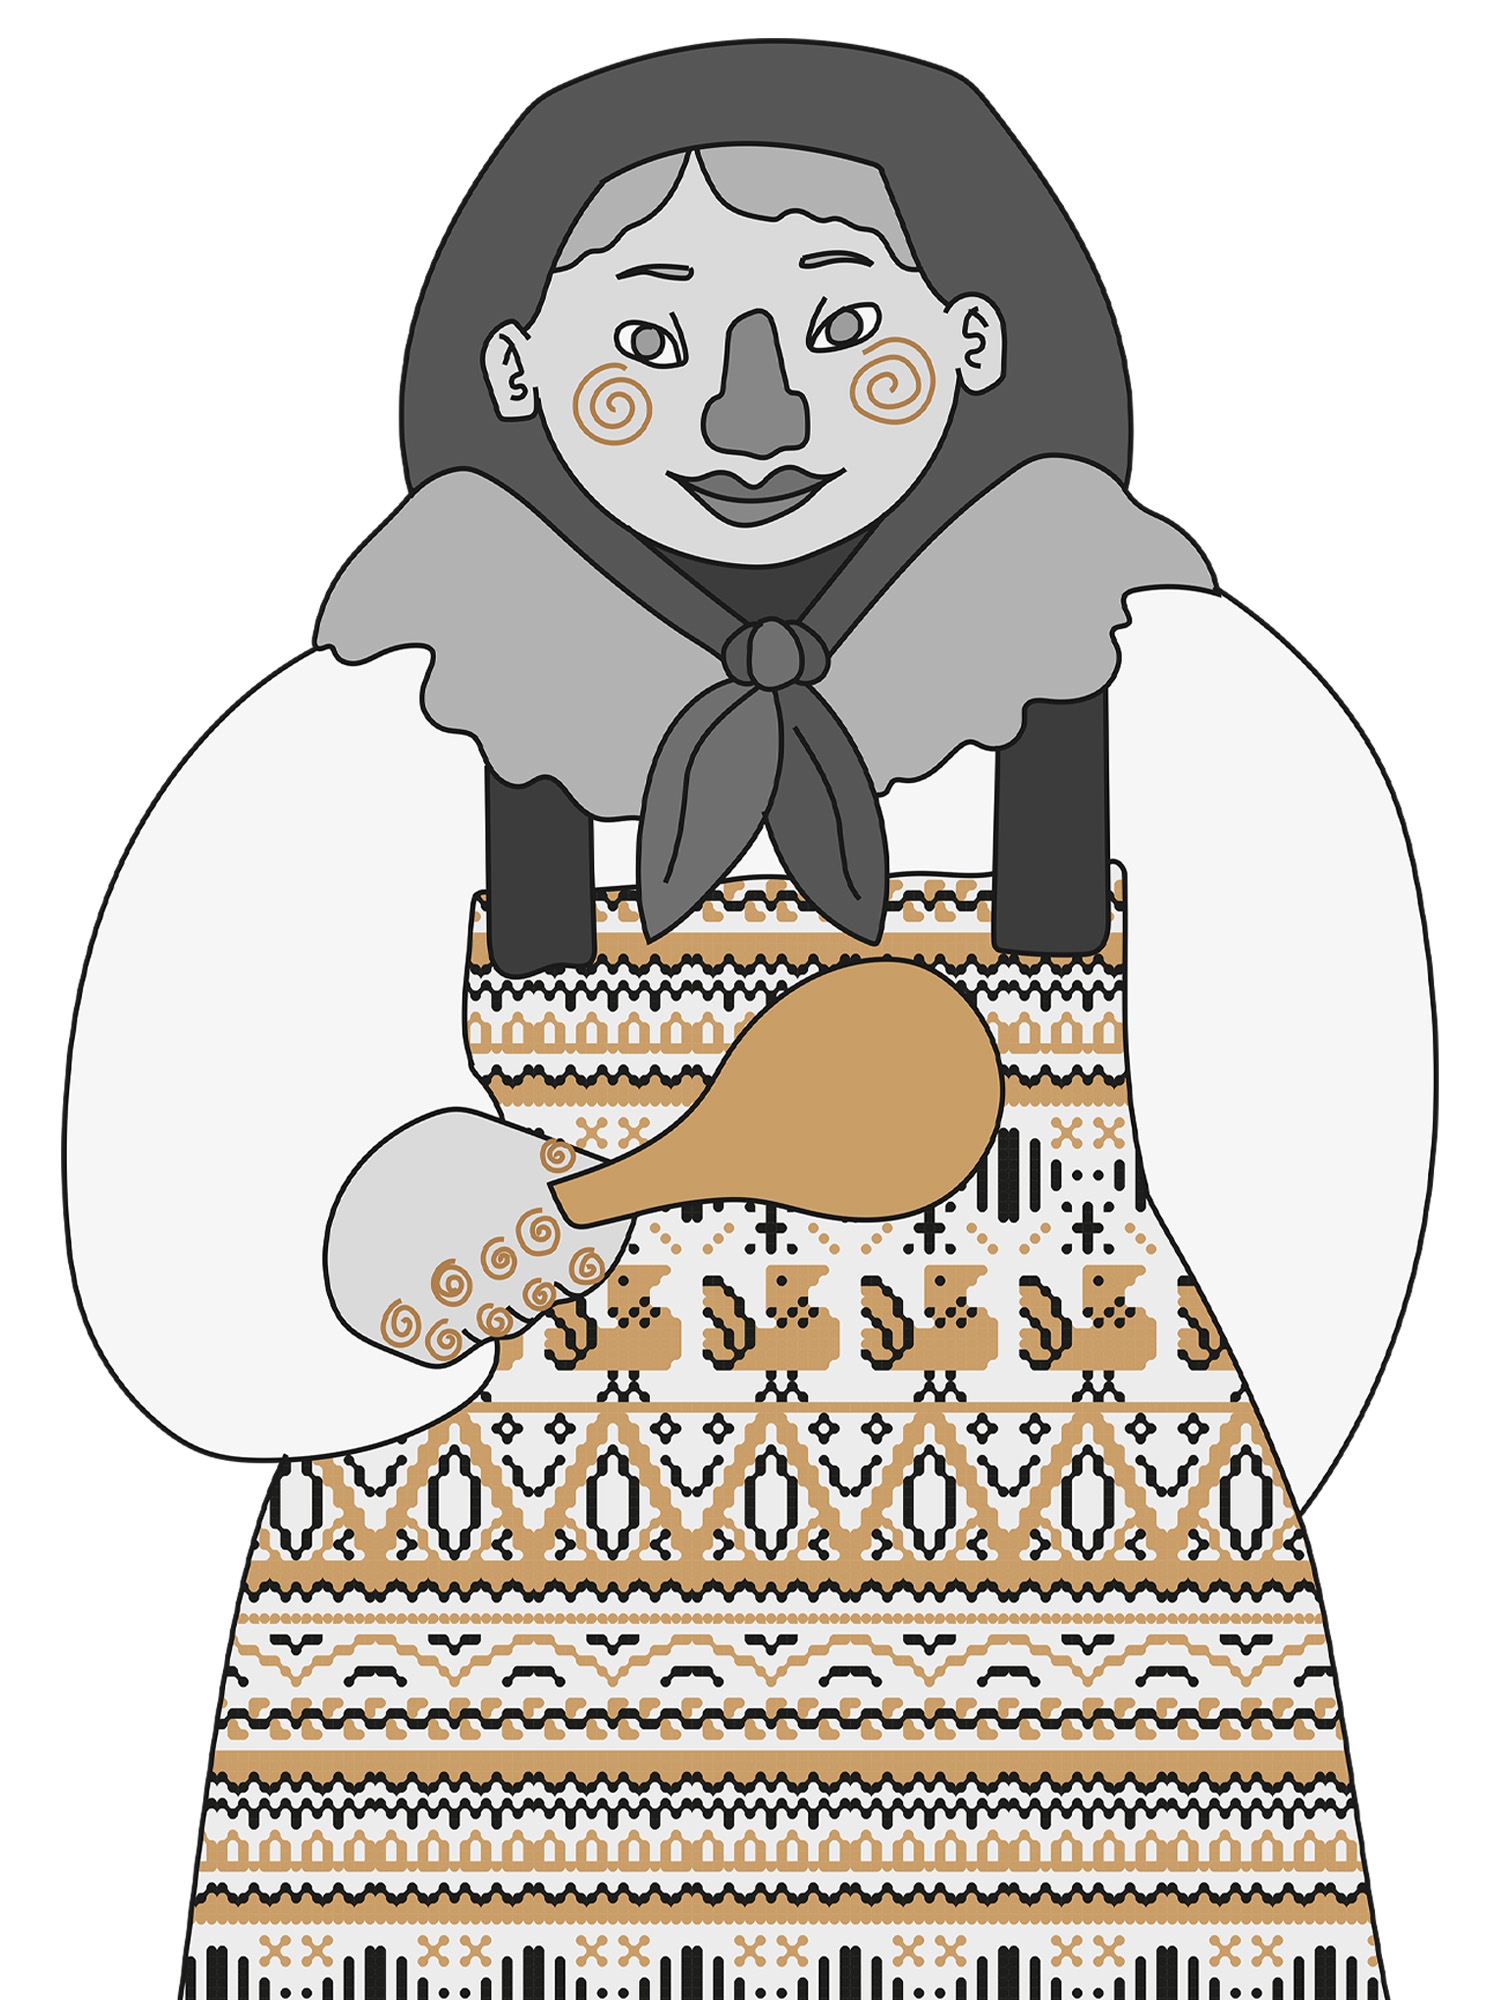 Illustrated Russian woman wearing patterned clothes